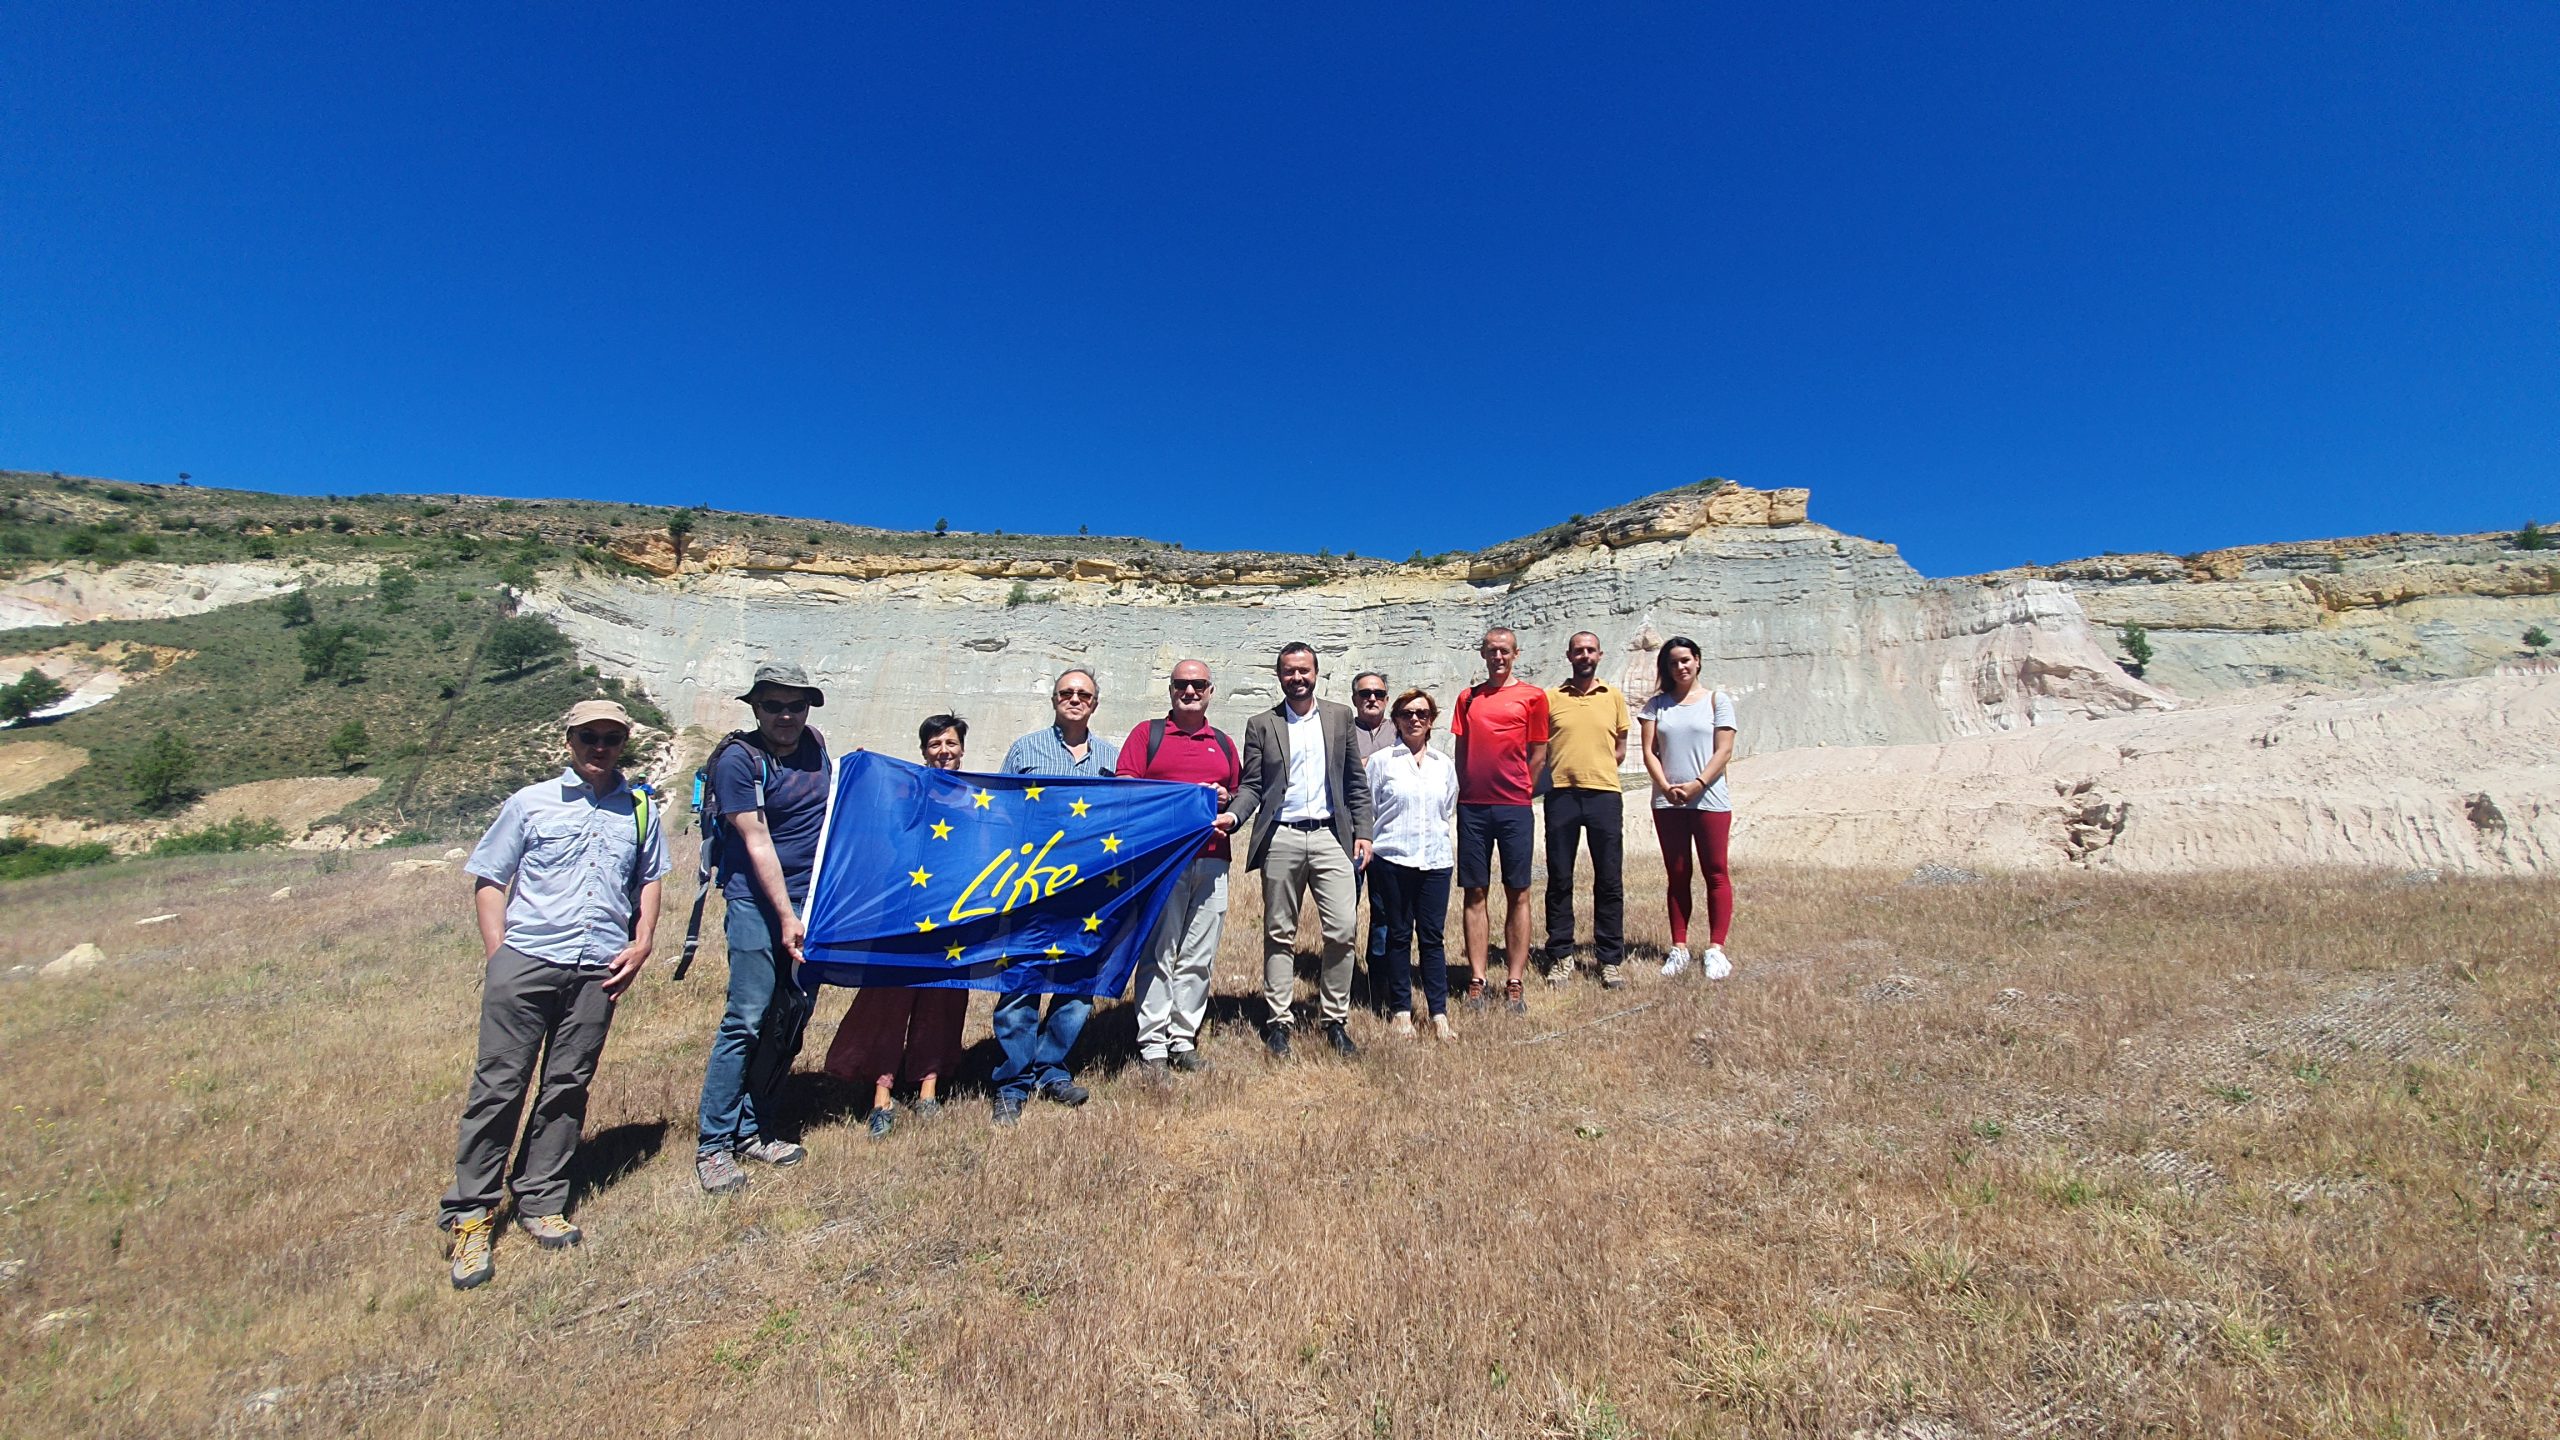 Castilla-La Mancha sees its environmental policies recognized by being chosen for the ‘European Mission for Adaptation to Climate Change’